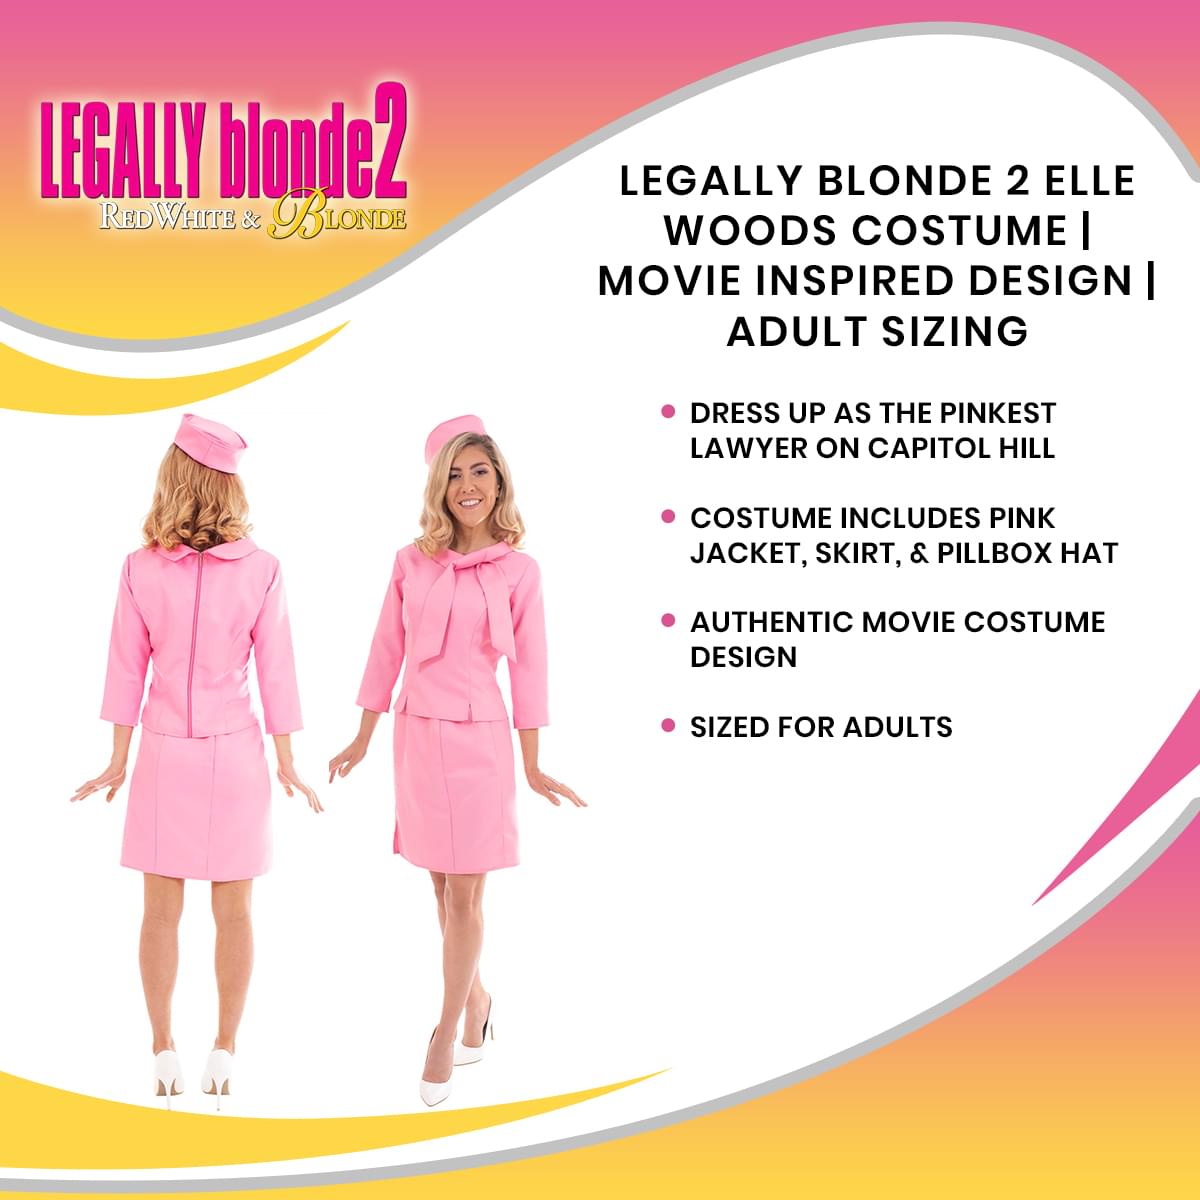 Legally Blonde 2 Elle Woods Costume | Movie Inspired Design | Sized For Adults